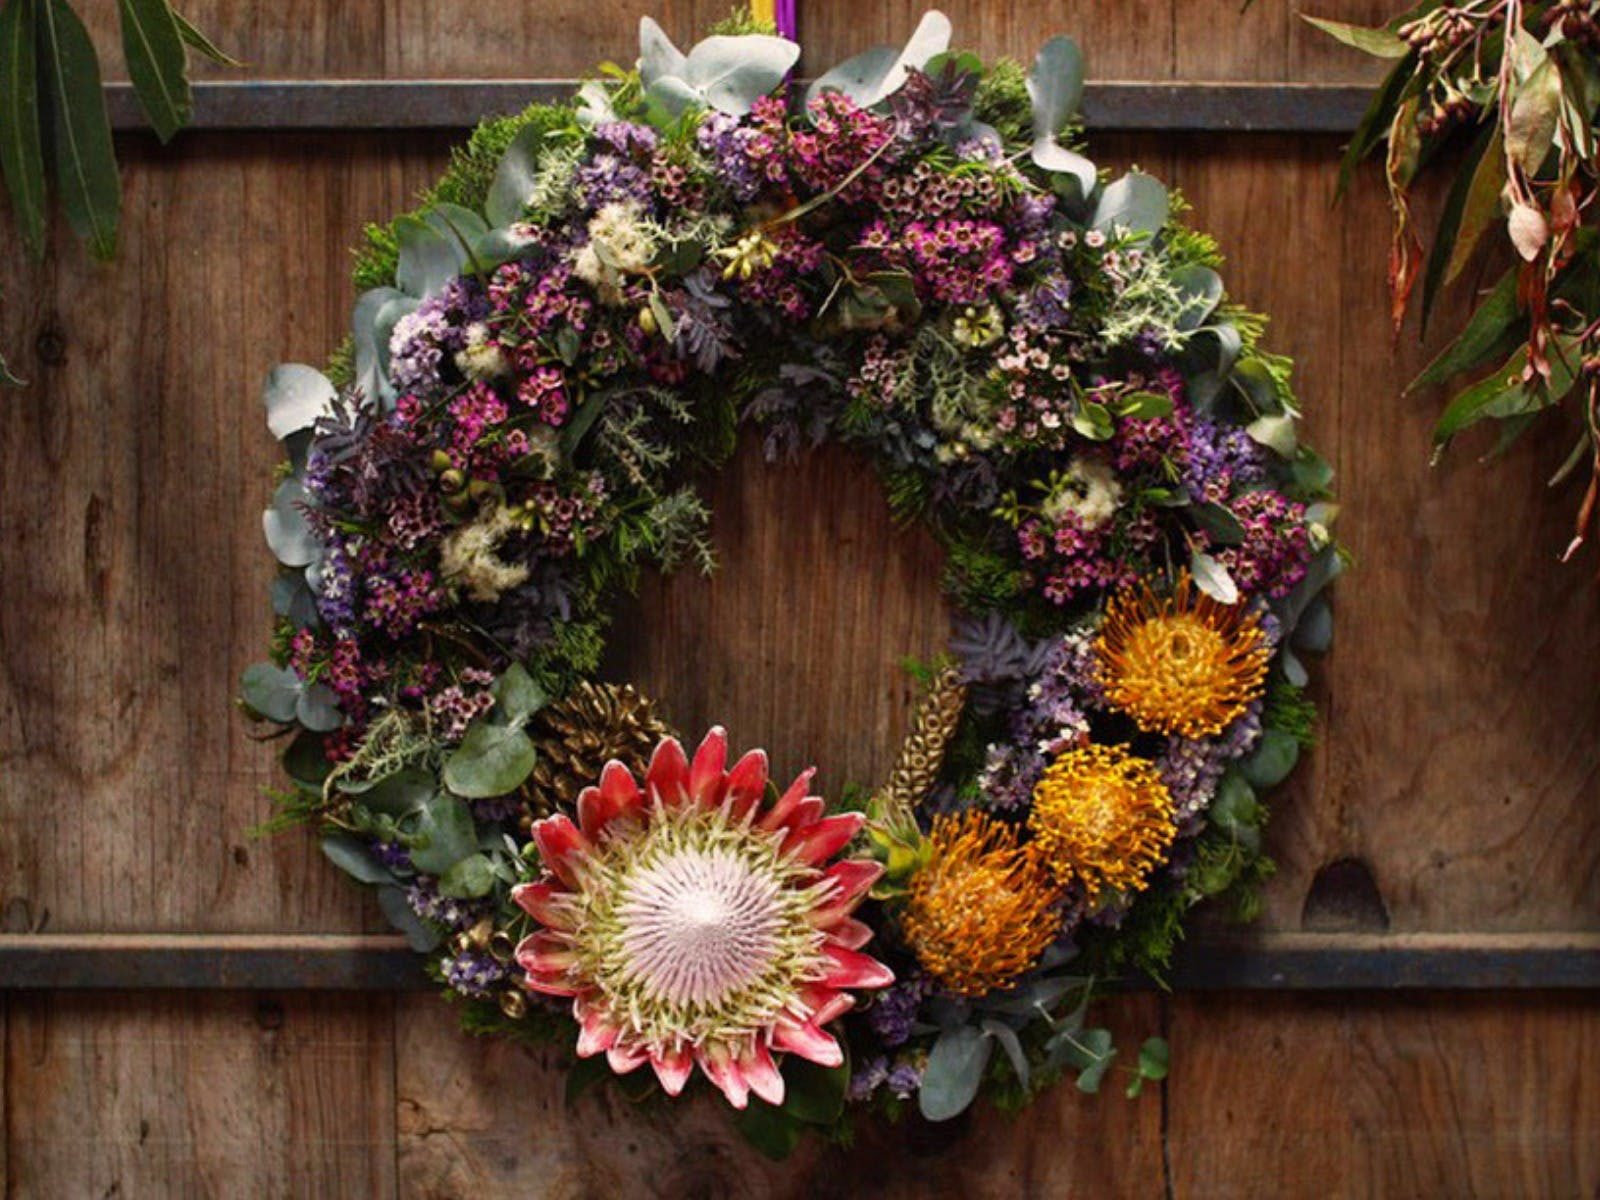 Christmas wreath, hanging on a wooden wall, native flowers and foliage, large king protea bottom cen